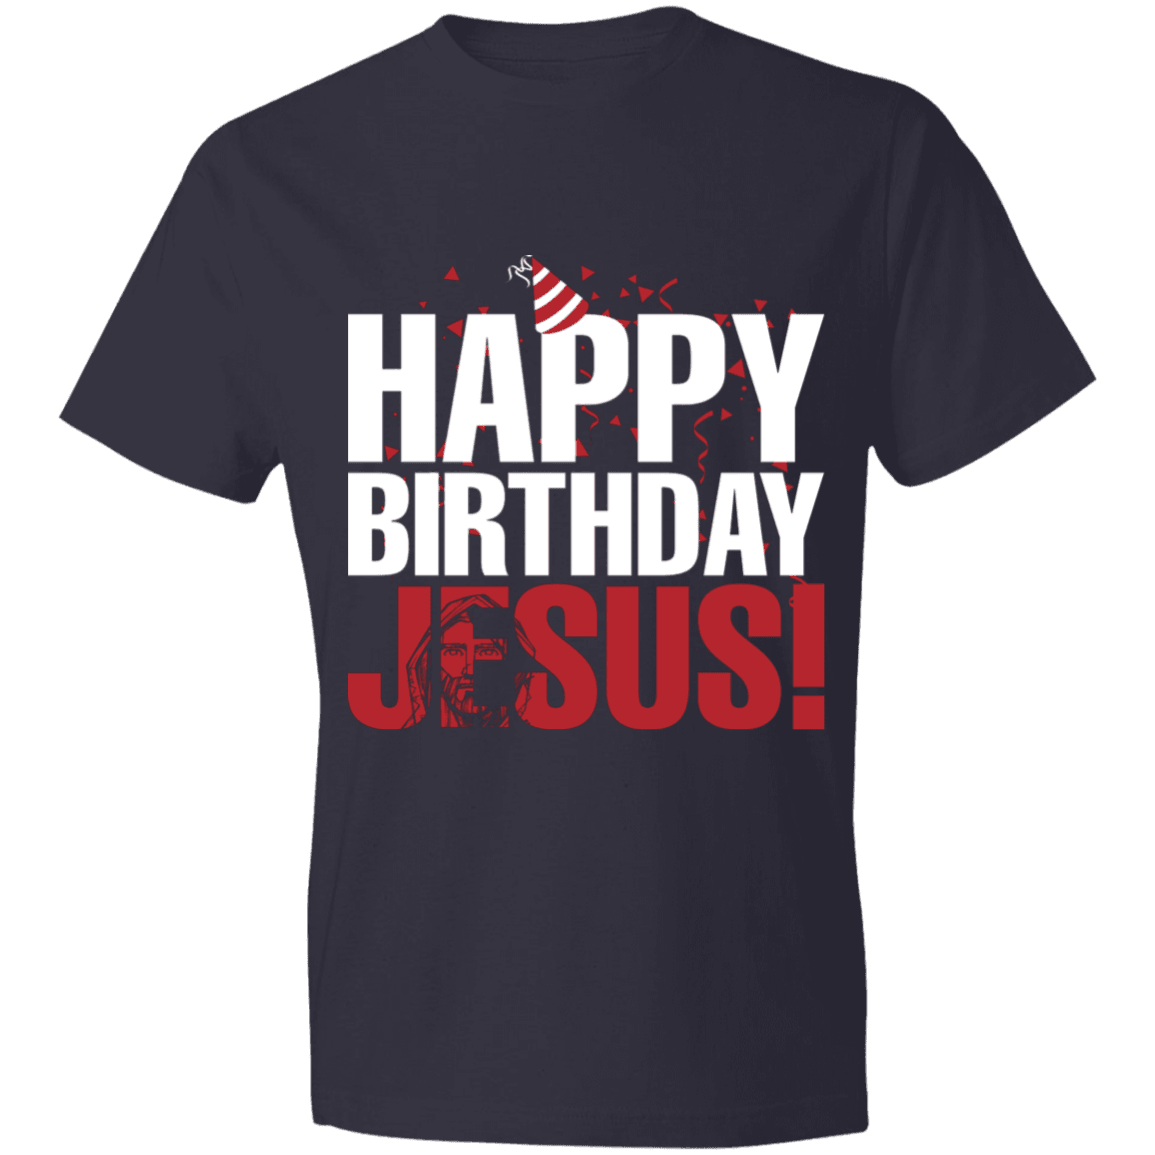 Designs by MyUtopia Shout Out:Happy Birthday Jesus - Lightweight Unisex T-Shirt,Navy / S,Adult Unisex T-Shirt